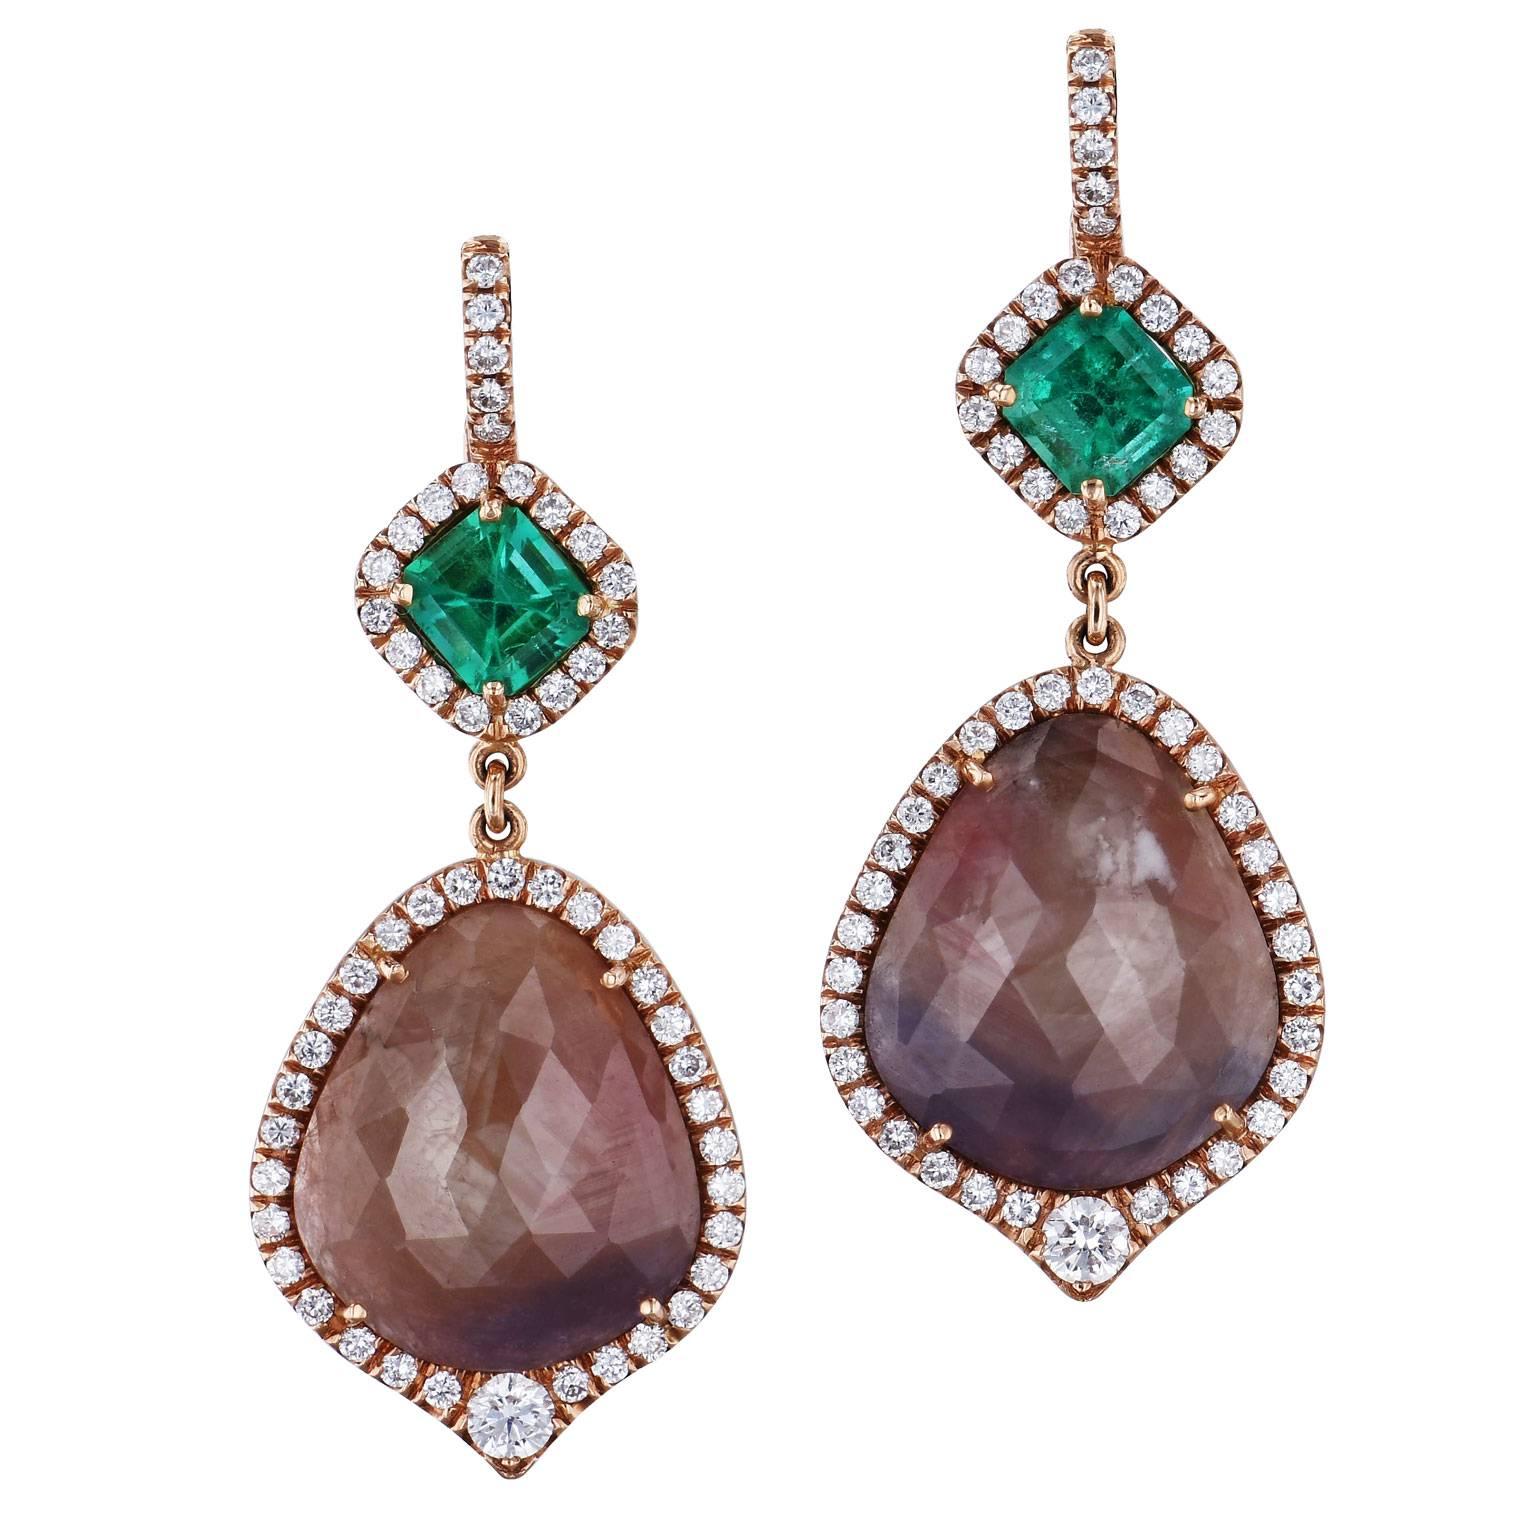 20.00 ct Light Brown Sapphires 1.76 ct Colombian Emerald and Diamond Earrings